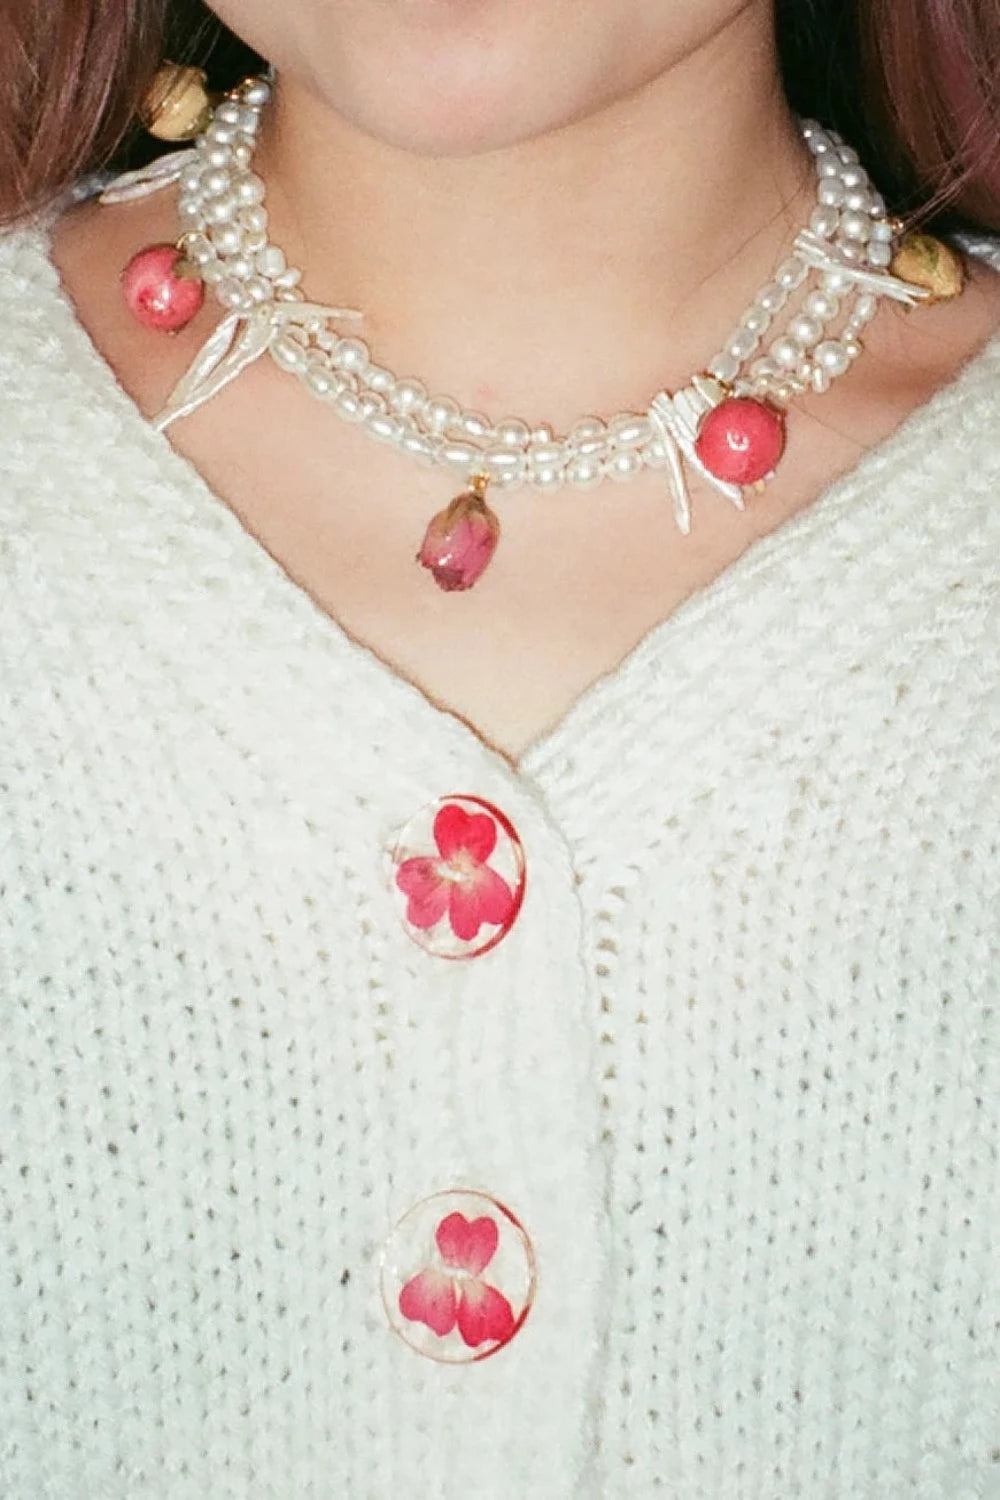 Dauphipnette - Rosewater Triple Strand Necklace: Ivory